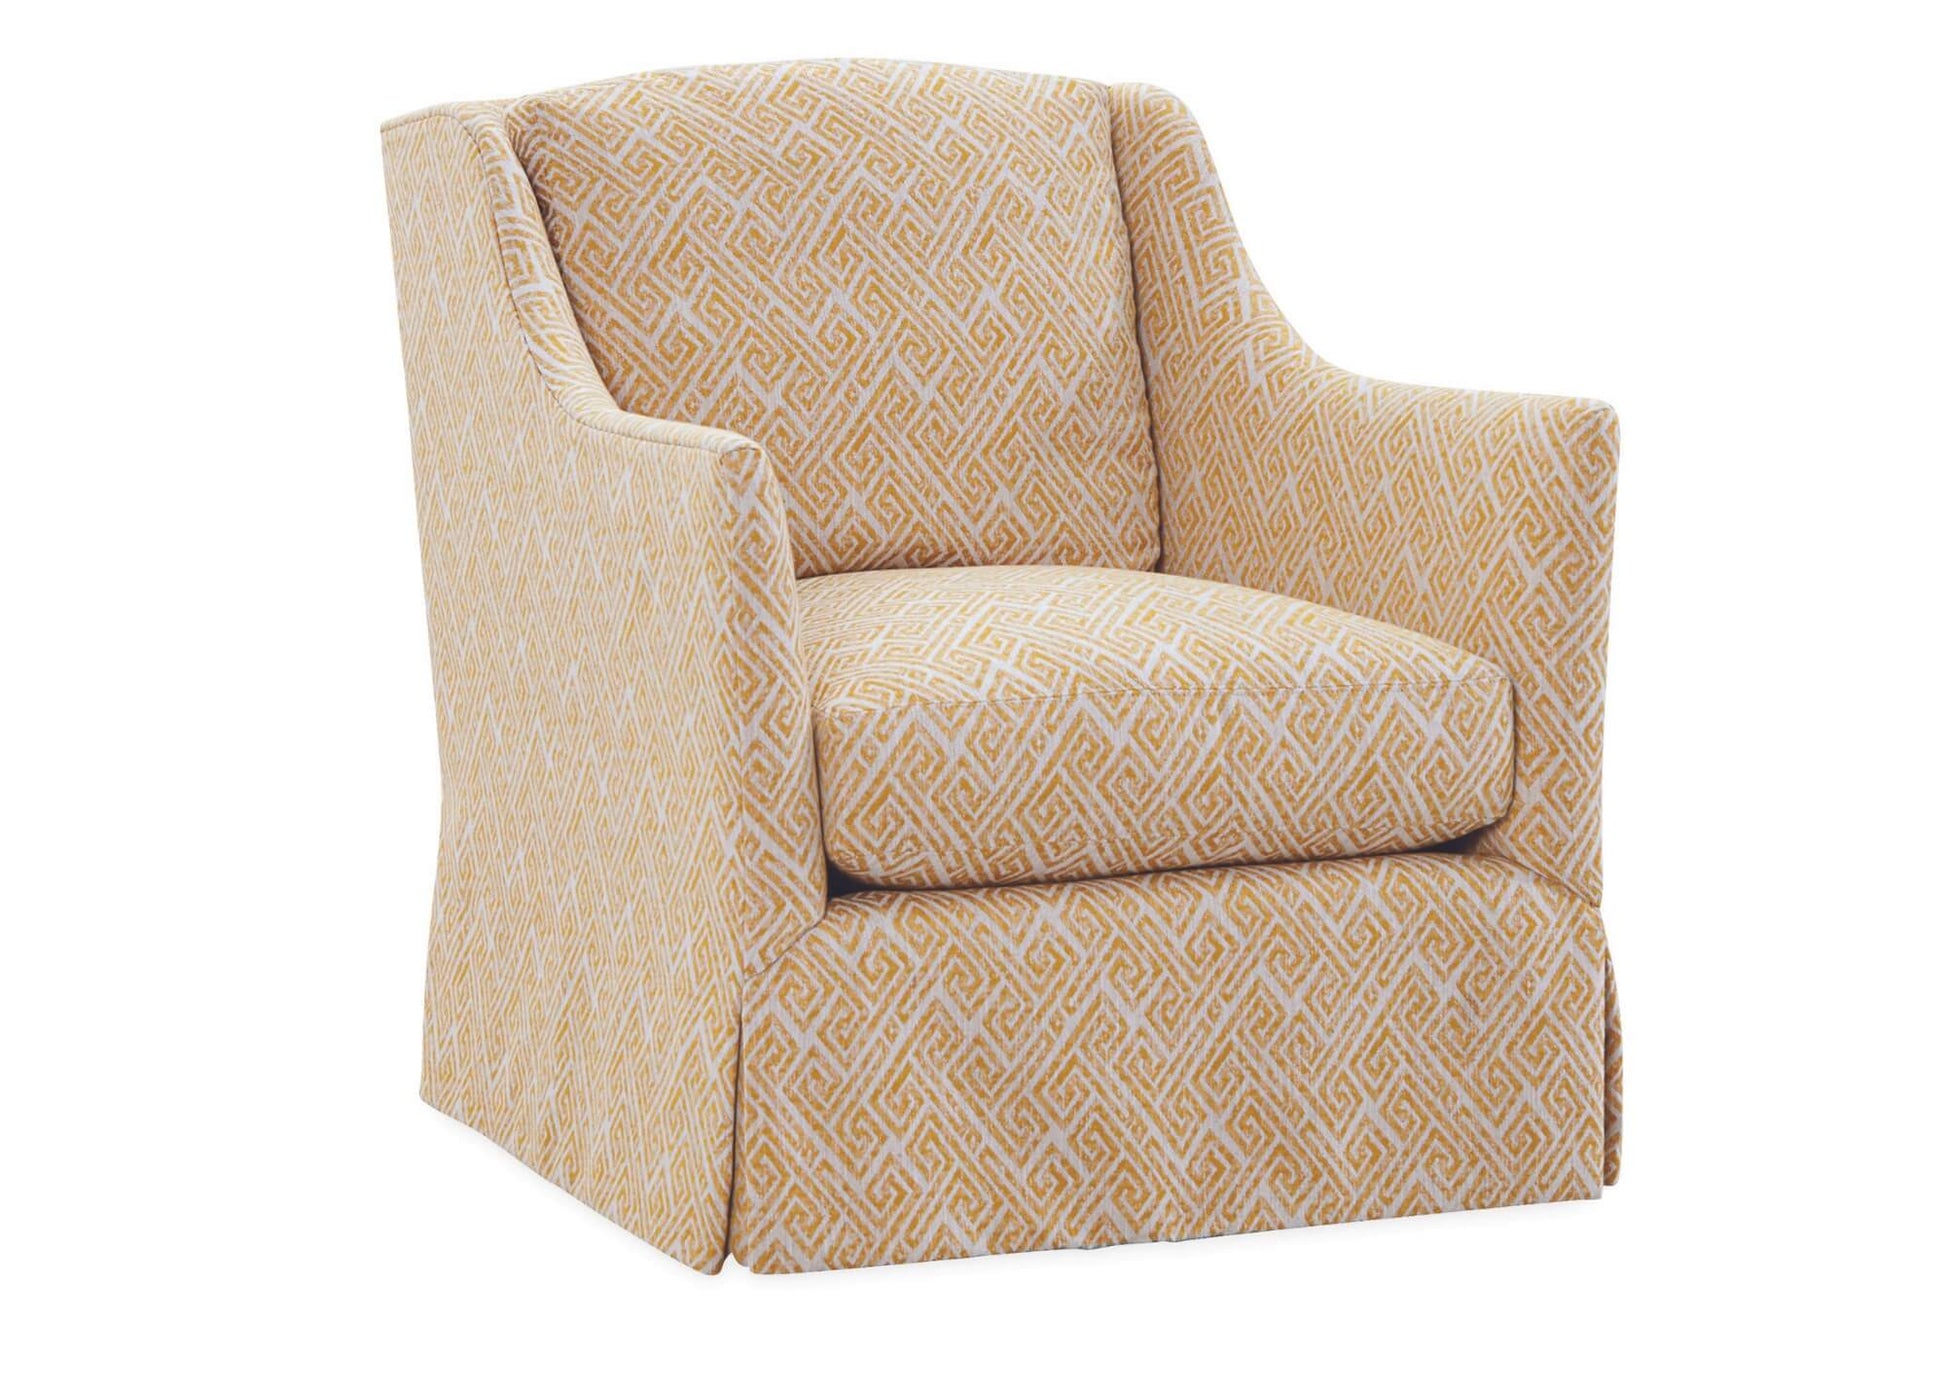 Lee Industries 3821-01 Swivel Chair in a yellow oriental fabric with curve arm. 